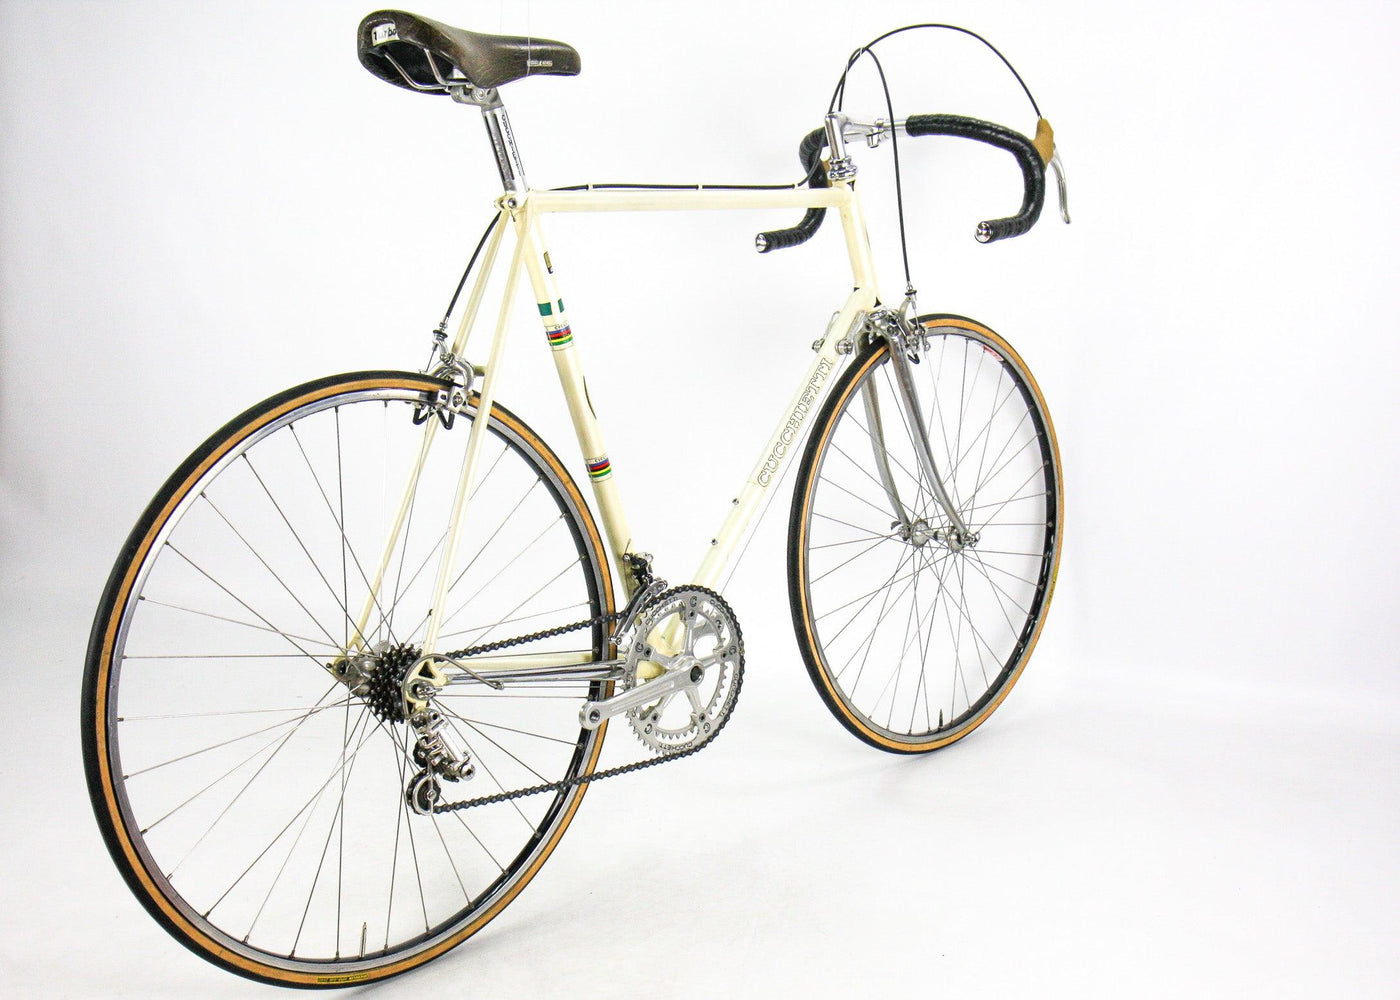 Cucchietti 1970s Classic Road Bicycle - Steel Vintage Bikes